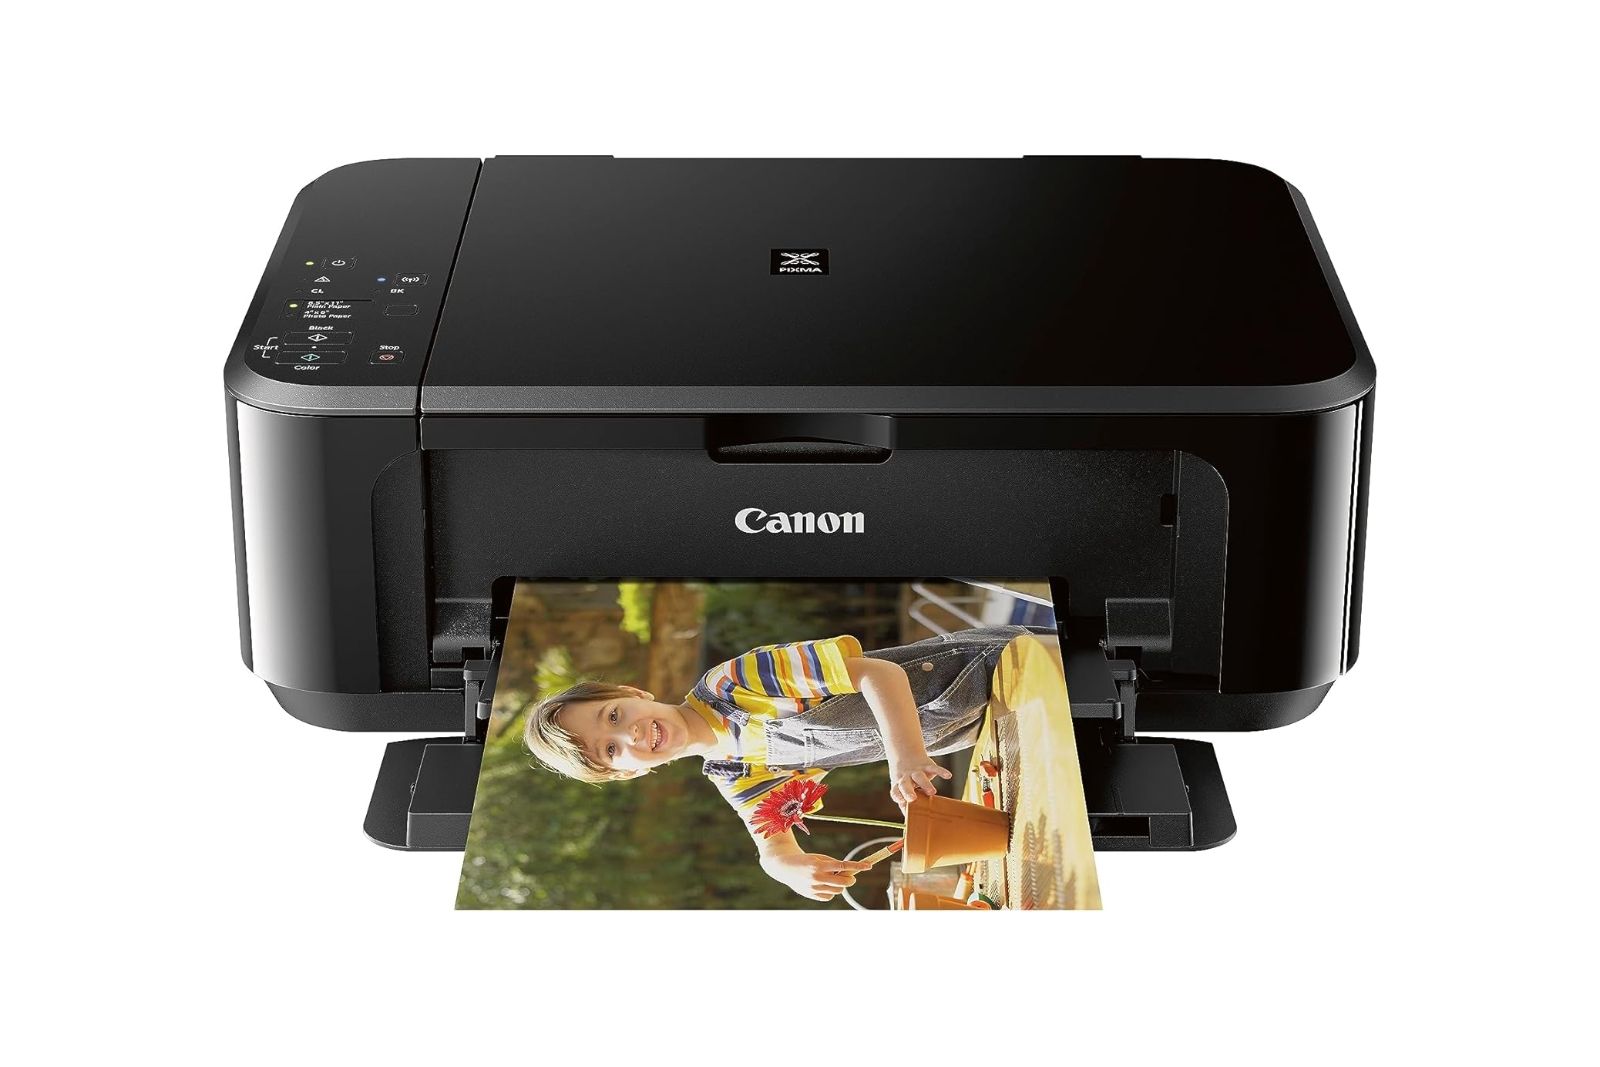 A black printer with a photo coming out of the front tray.